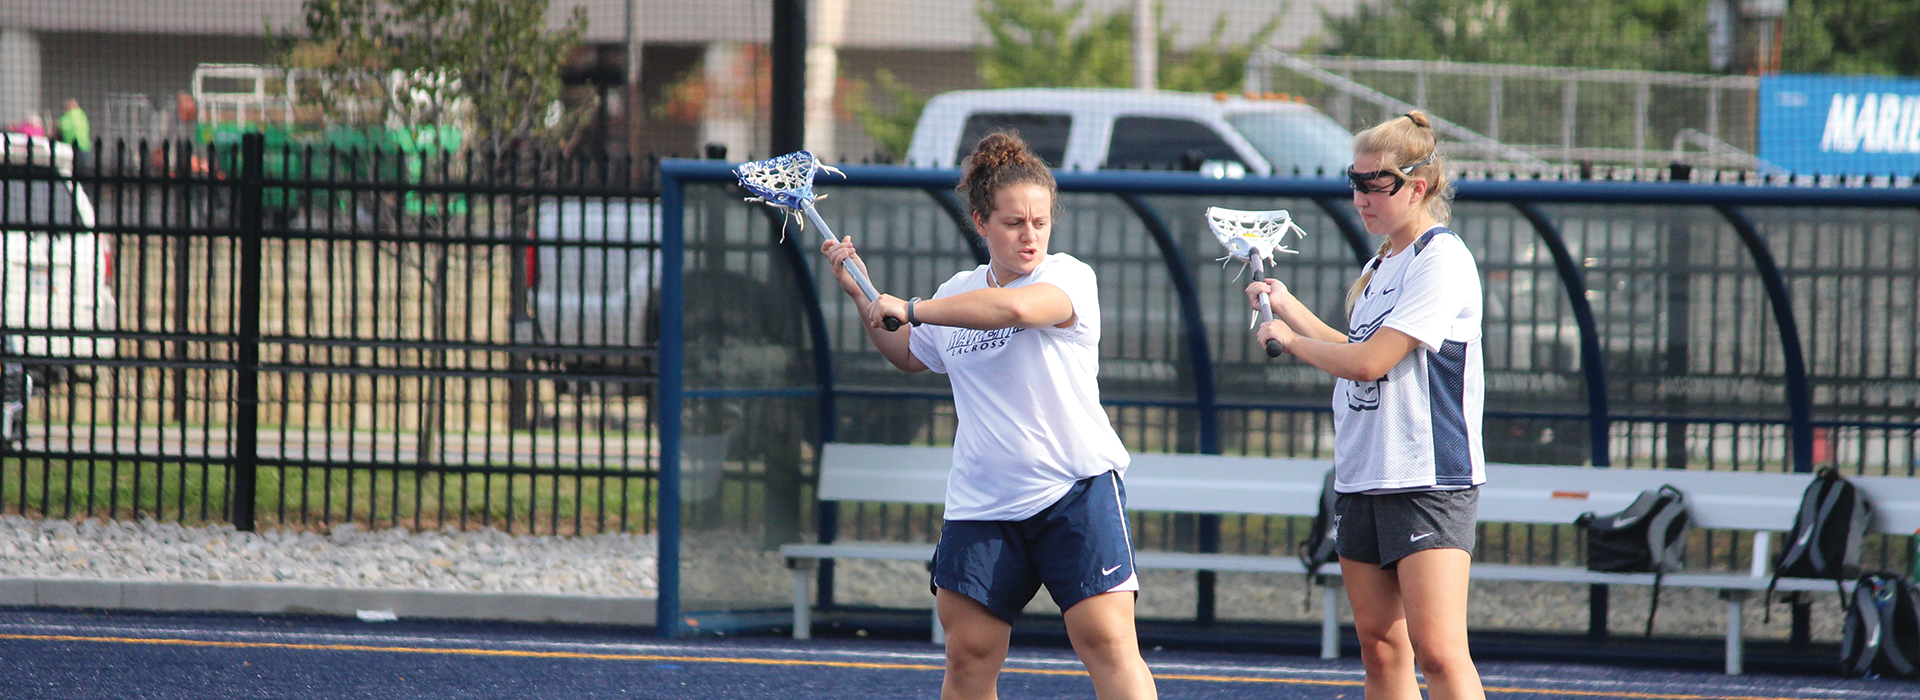 Jordan Anderson ’17 provides a few pointers as the assistant women’s lacrosse coach for Marietta College. Photo courtesy of Jeffrey Schaly, Marietta College